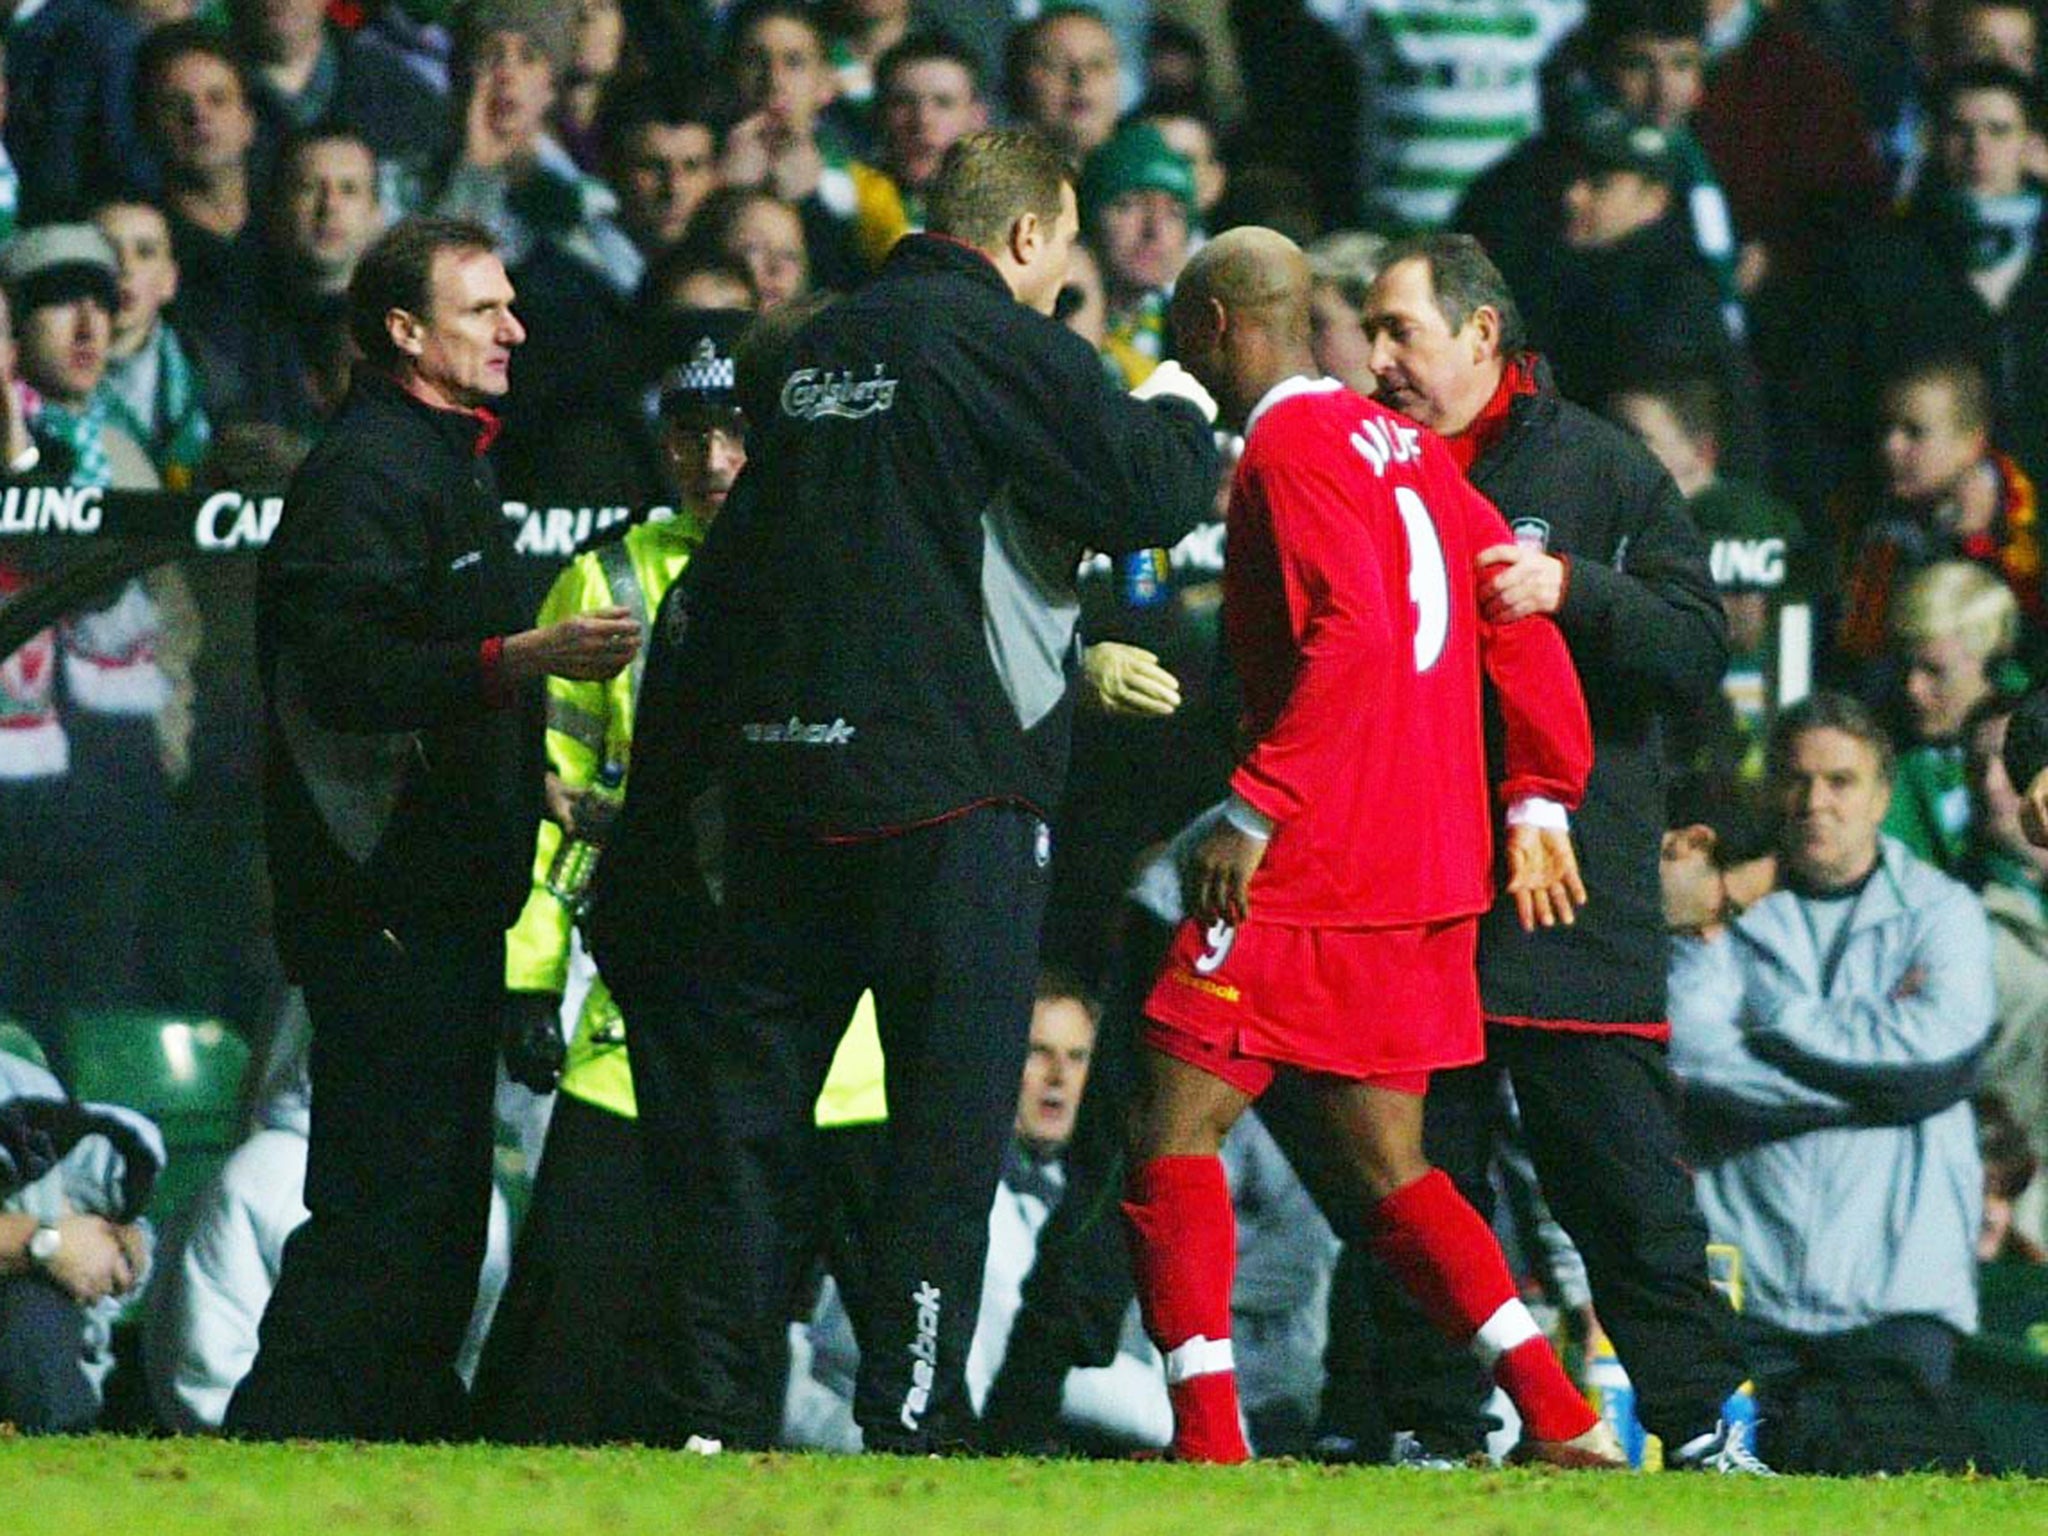 Diouf was fined £60,000 for spitting at a Celtic fan during a Uefa Cup tie in 2003